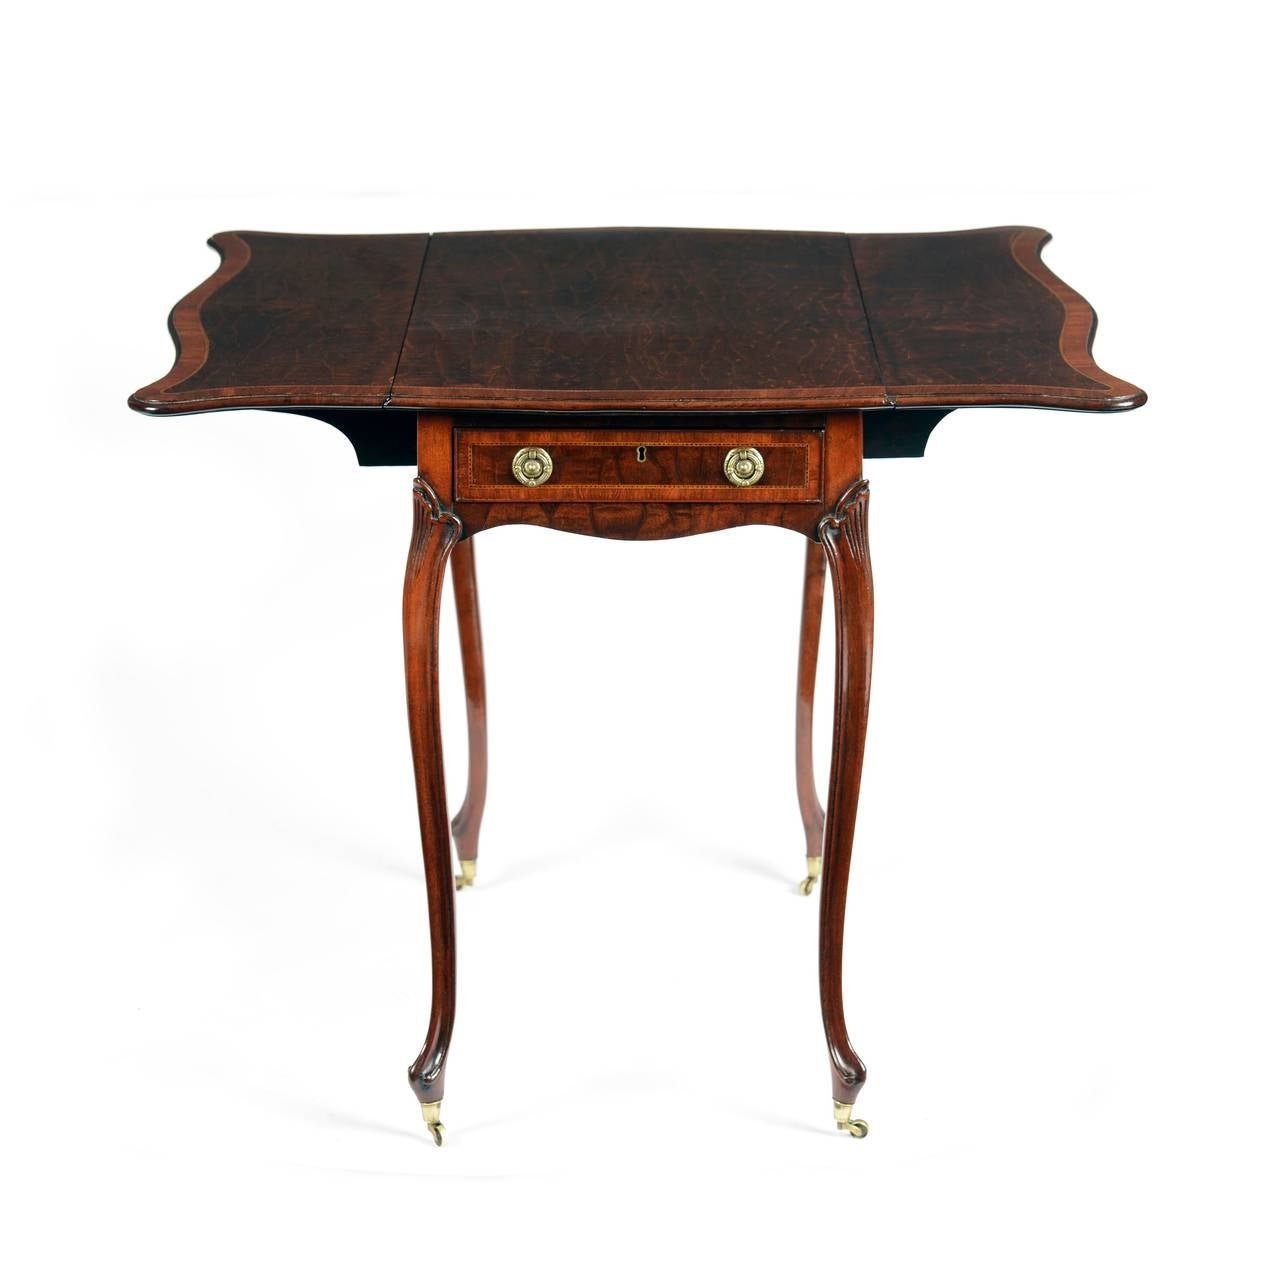 A rare George III “crocodile” mahogany and tulipwood banded butterfly top pembroke table, attributed to Thomas Chippendale. The fabulously figured top of serpentine shape to all for sides forming a “butterfly” wing, with chequer stringing and